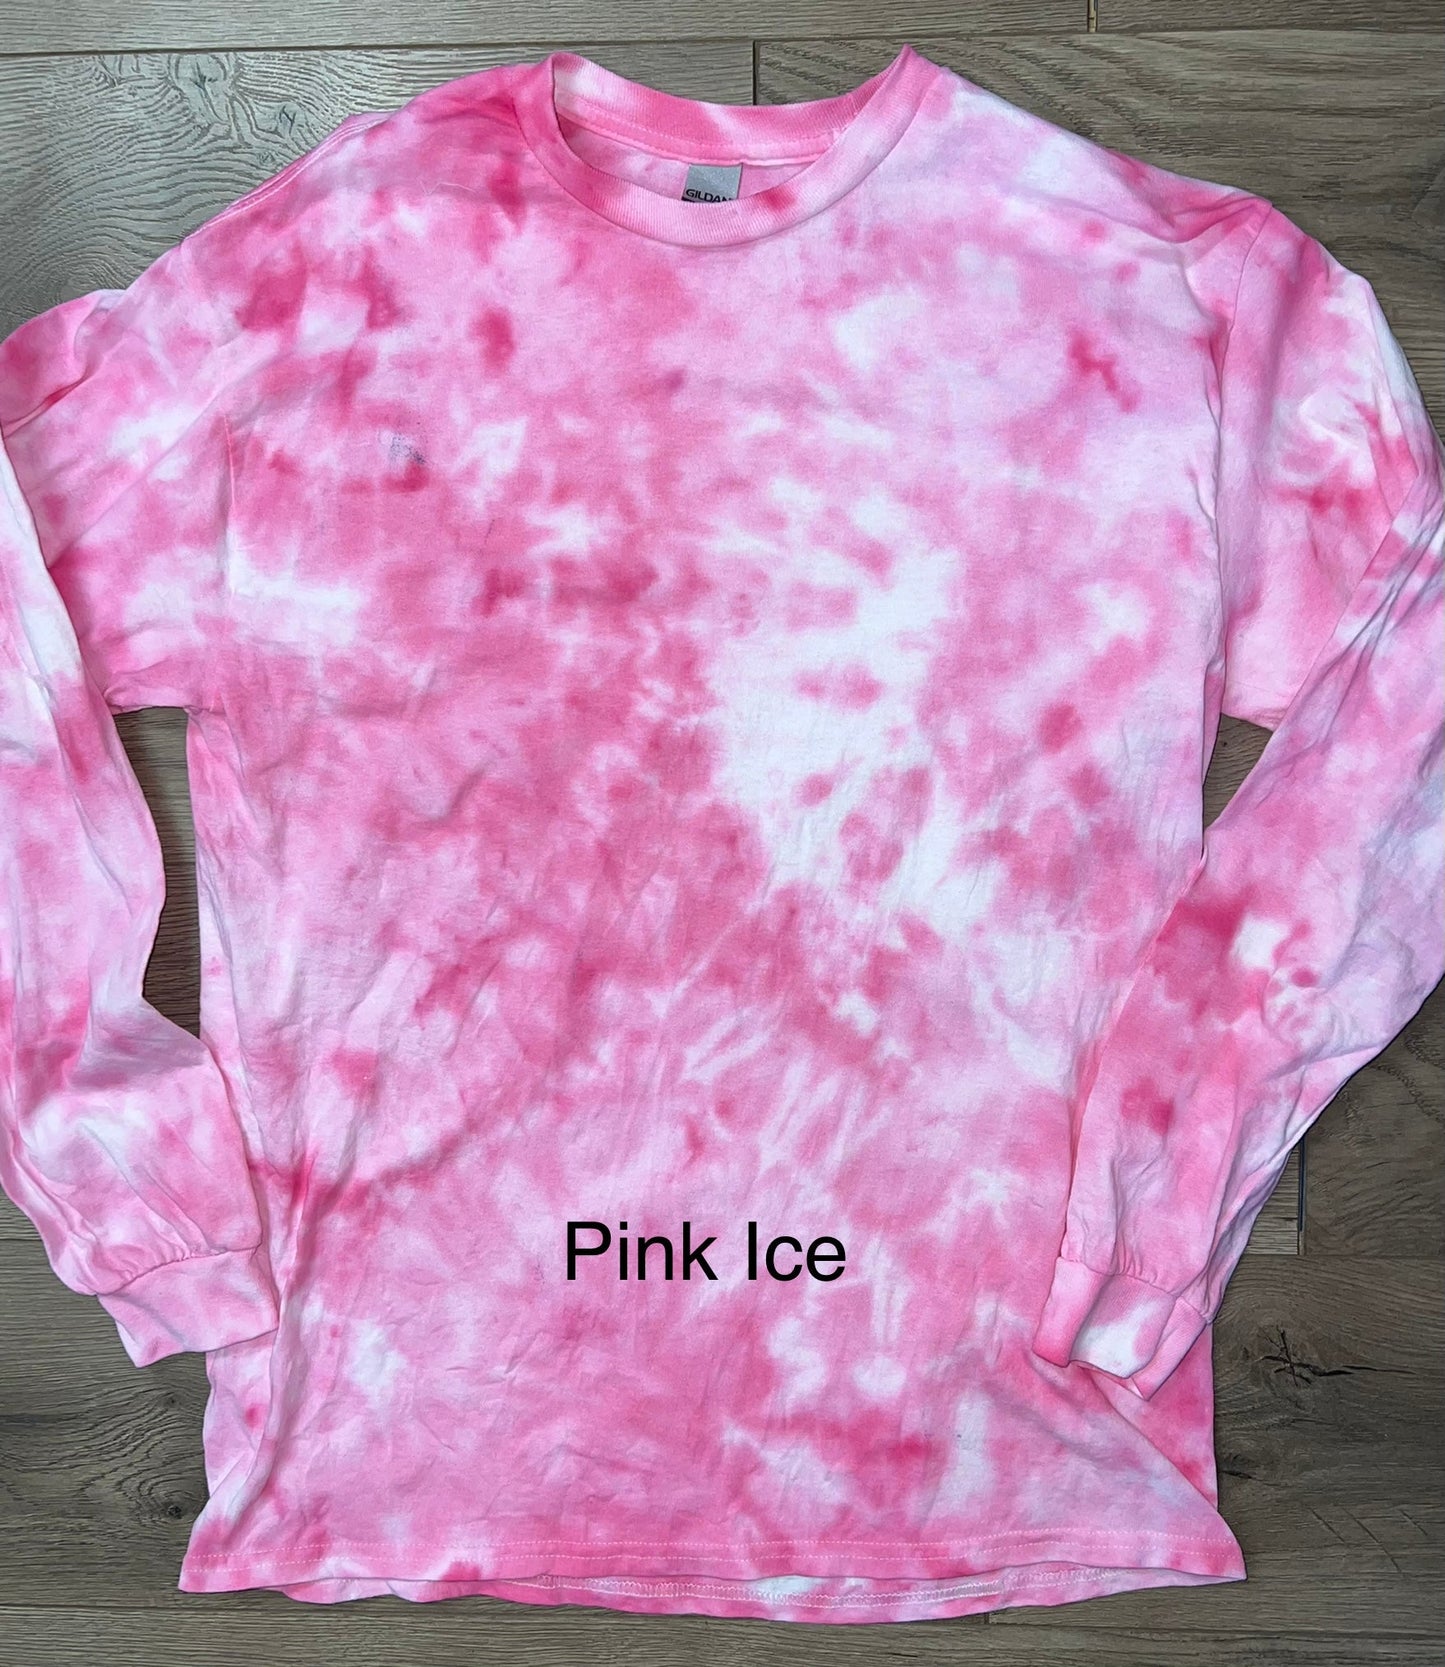 Hand-dyed Adult Cancer Ribbon Front/Back Long-Sleeve T-shirt - CHOOSE TIE DYE COLORS